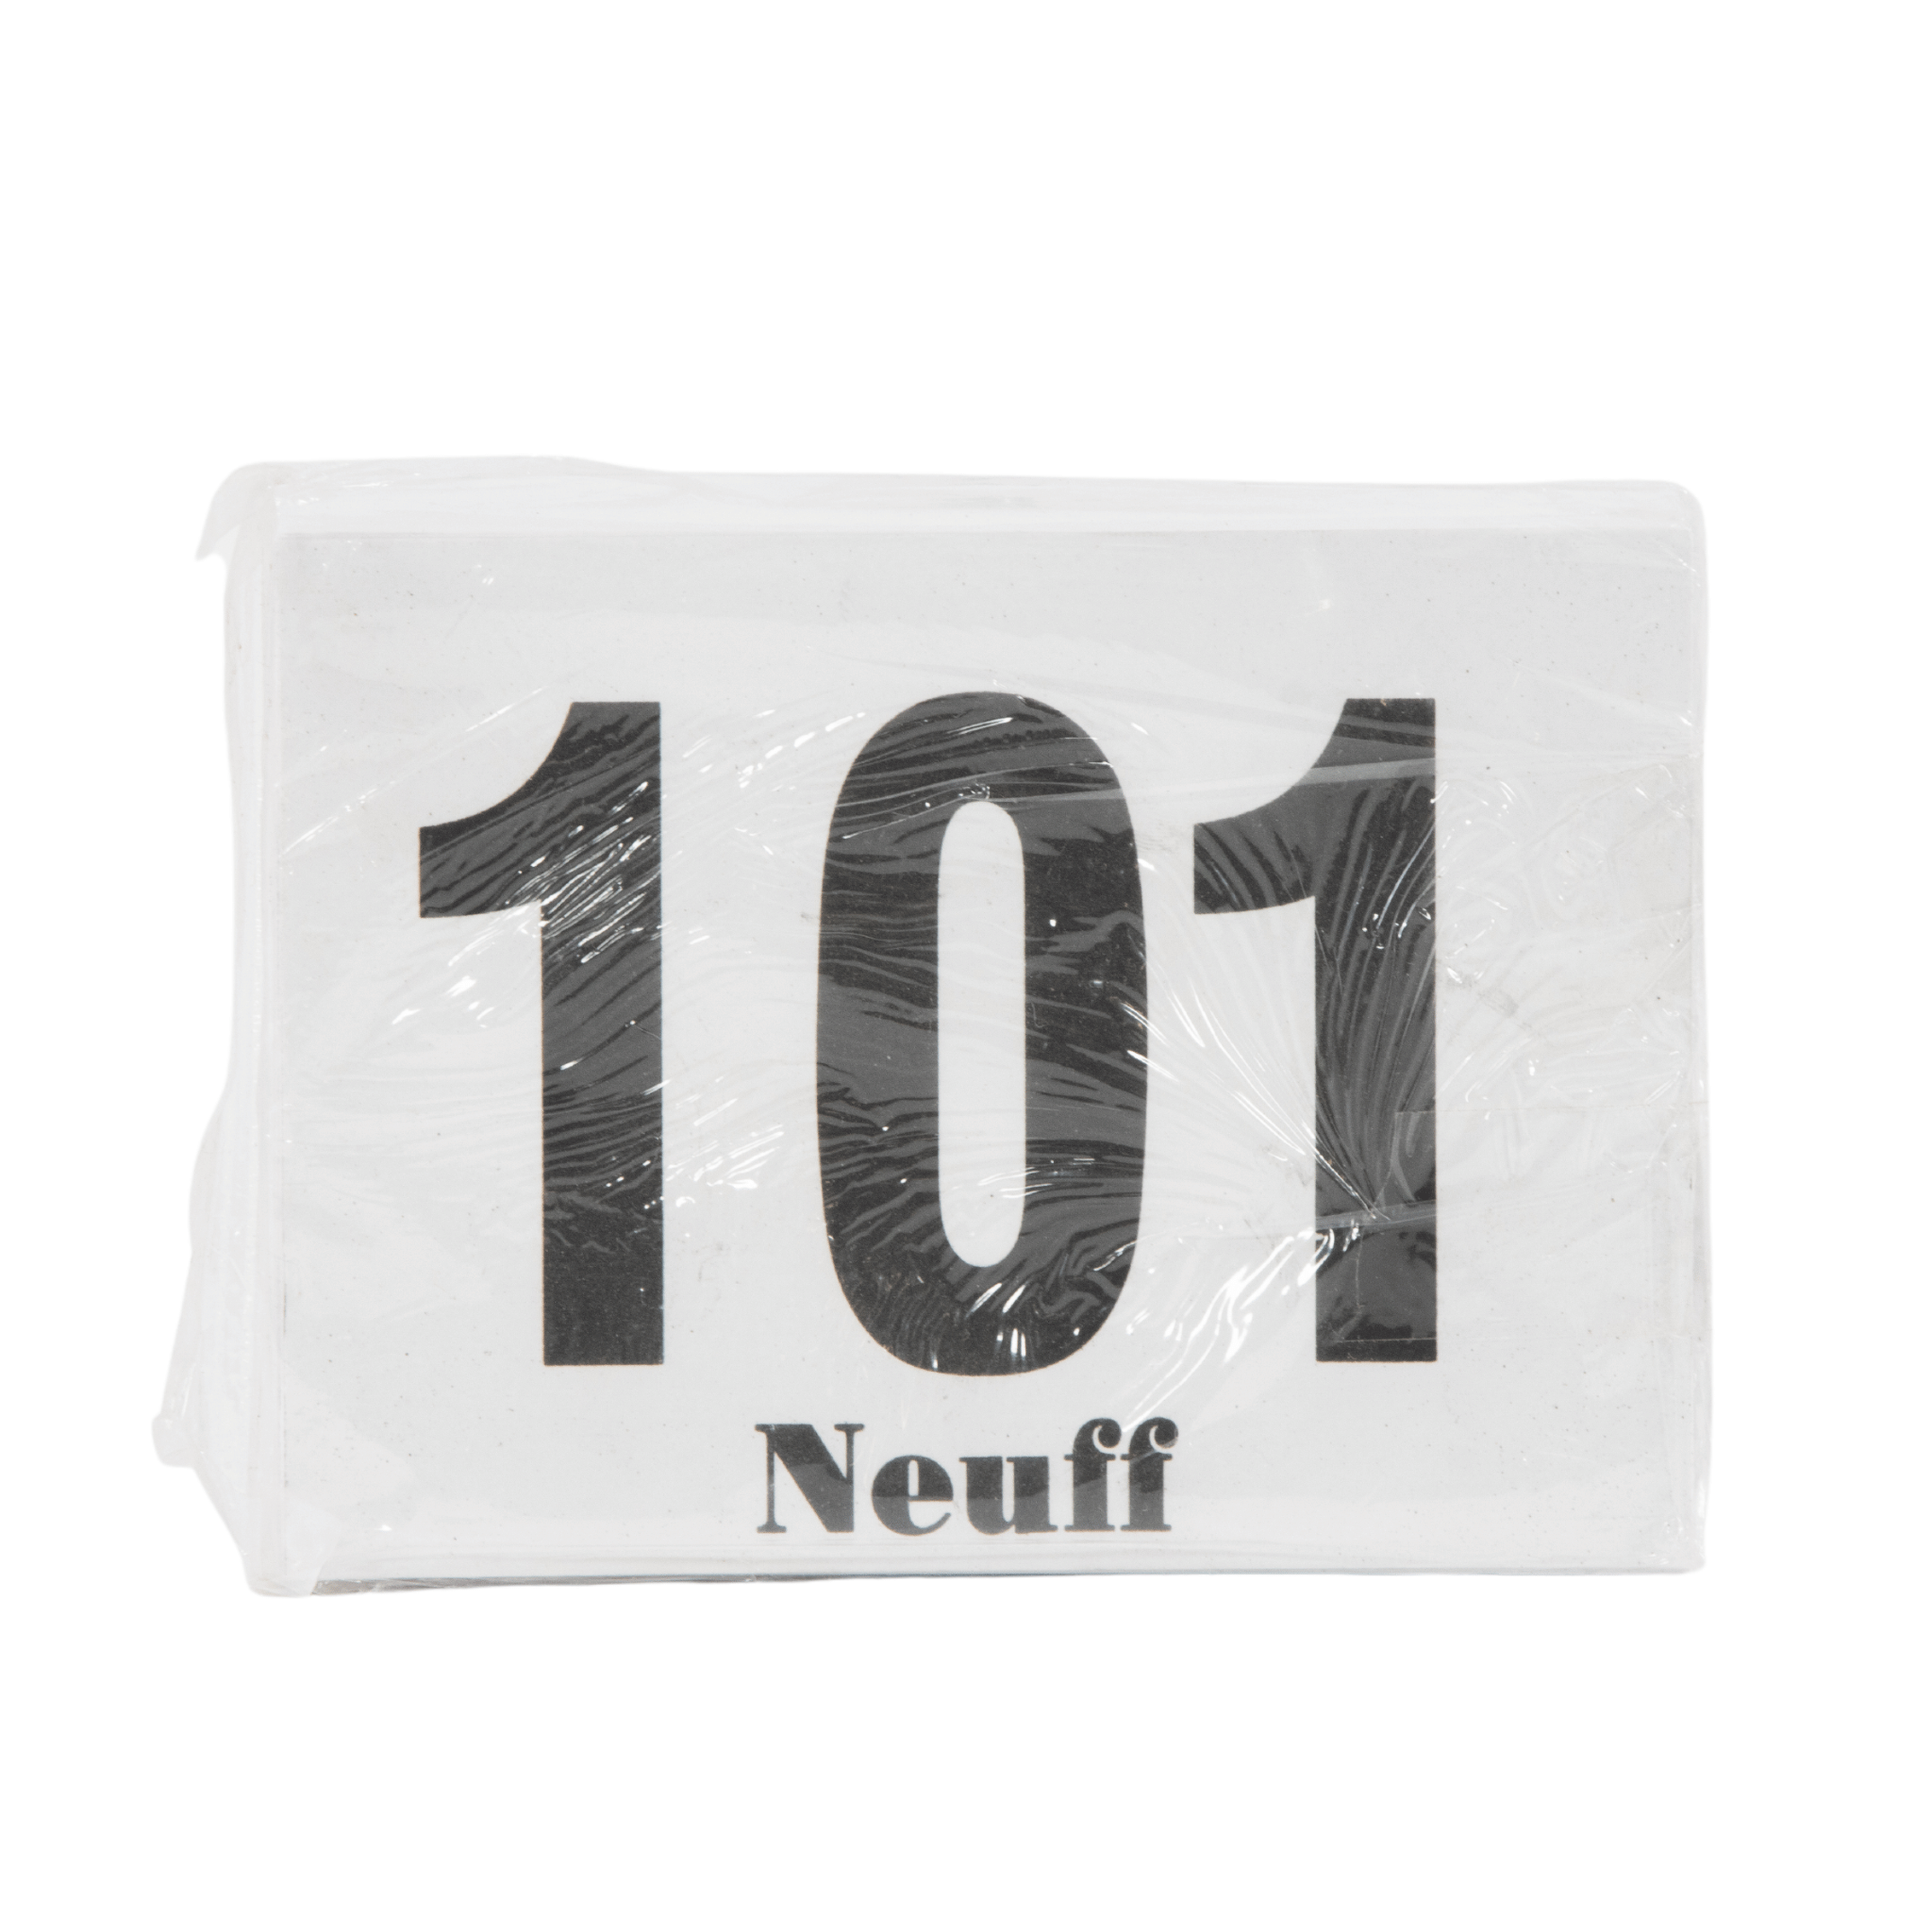 Race Numbers - Sequence of 100 numbers